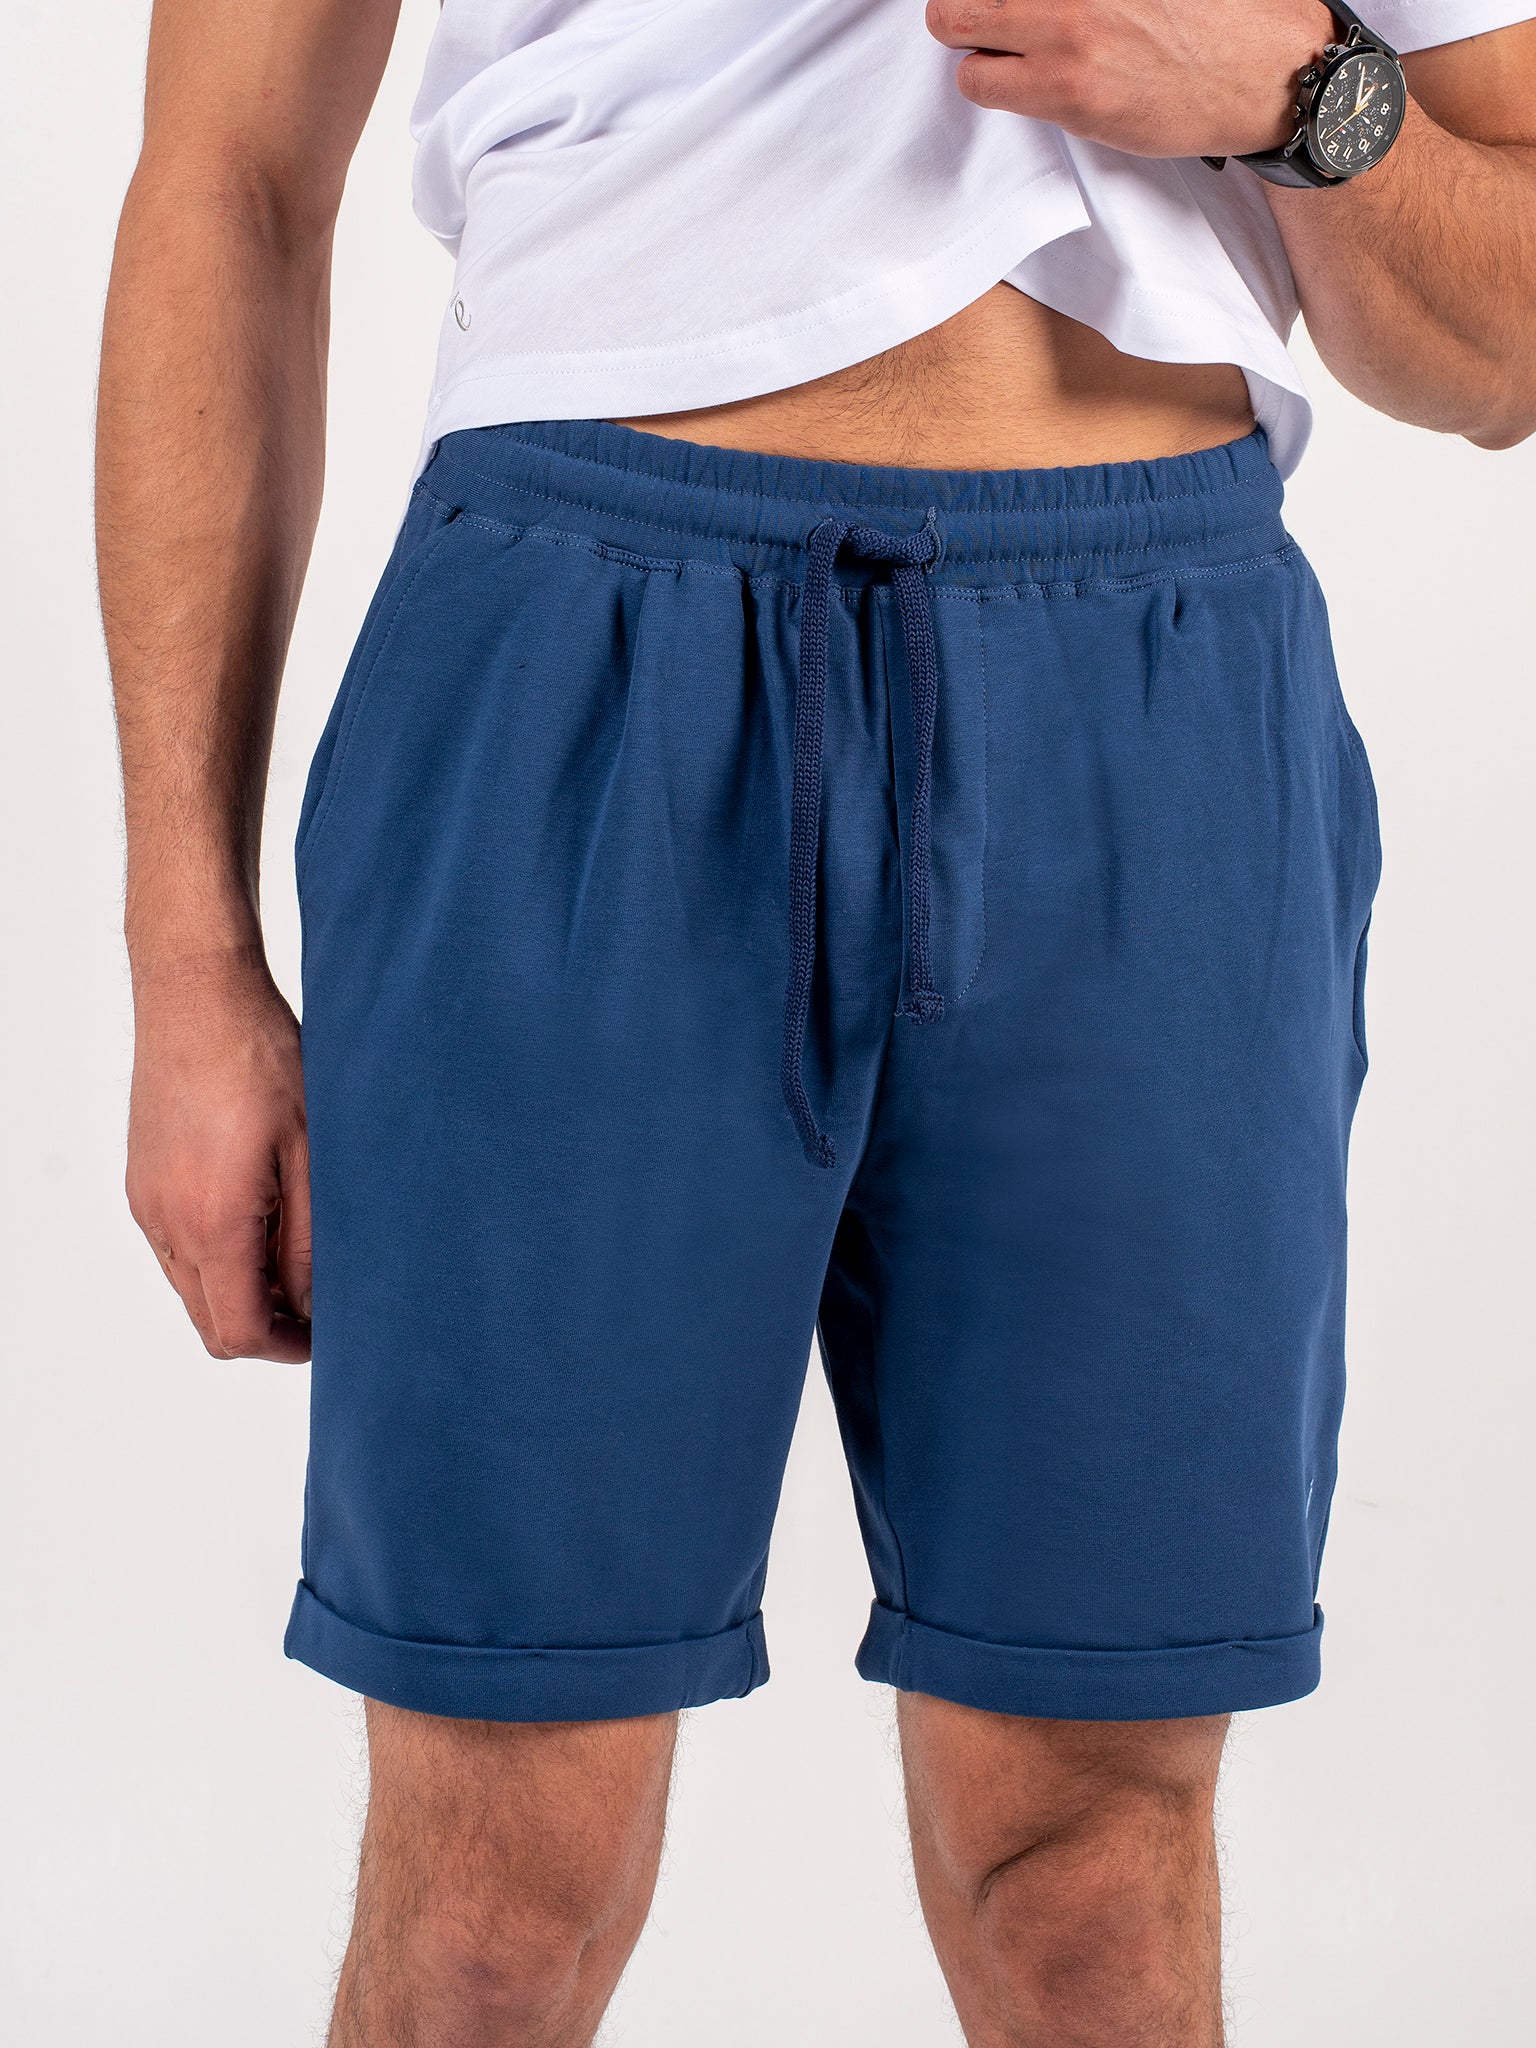 The Icon Short